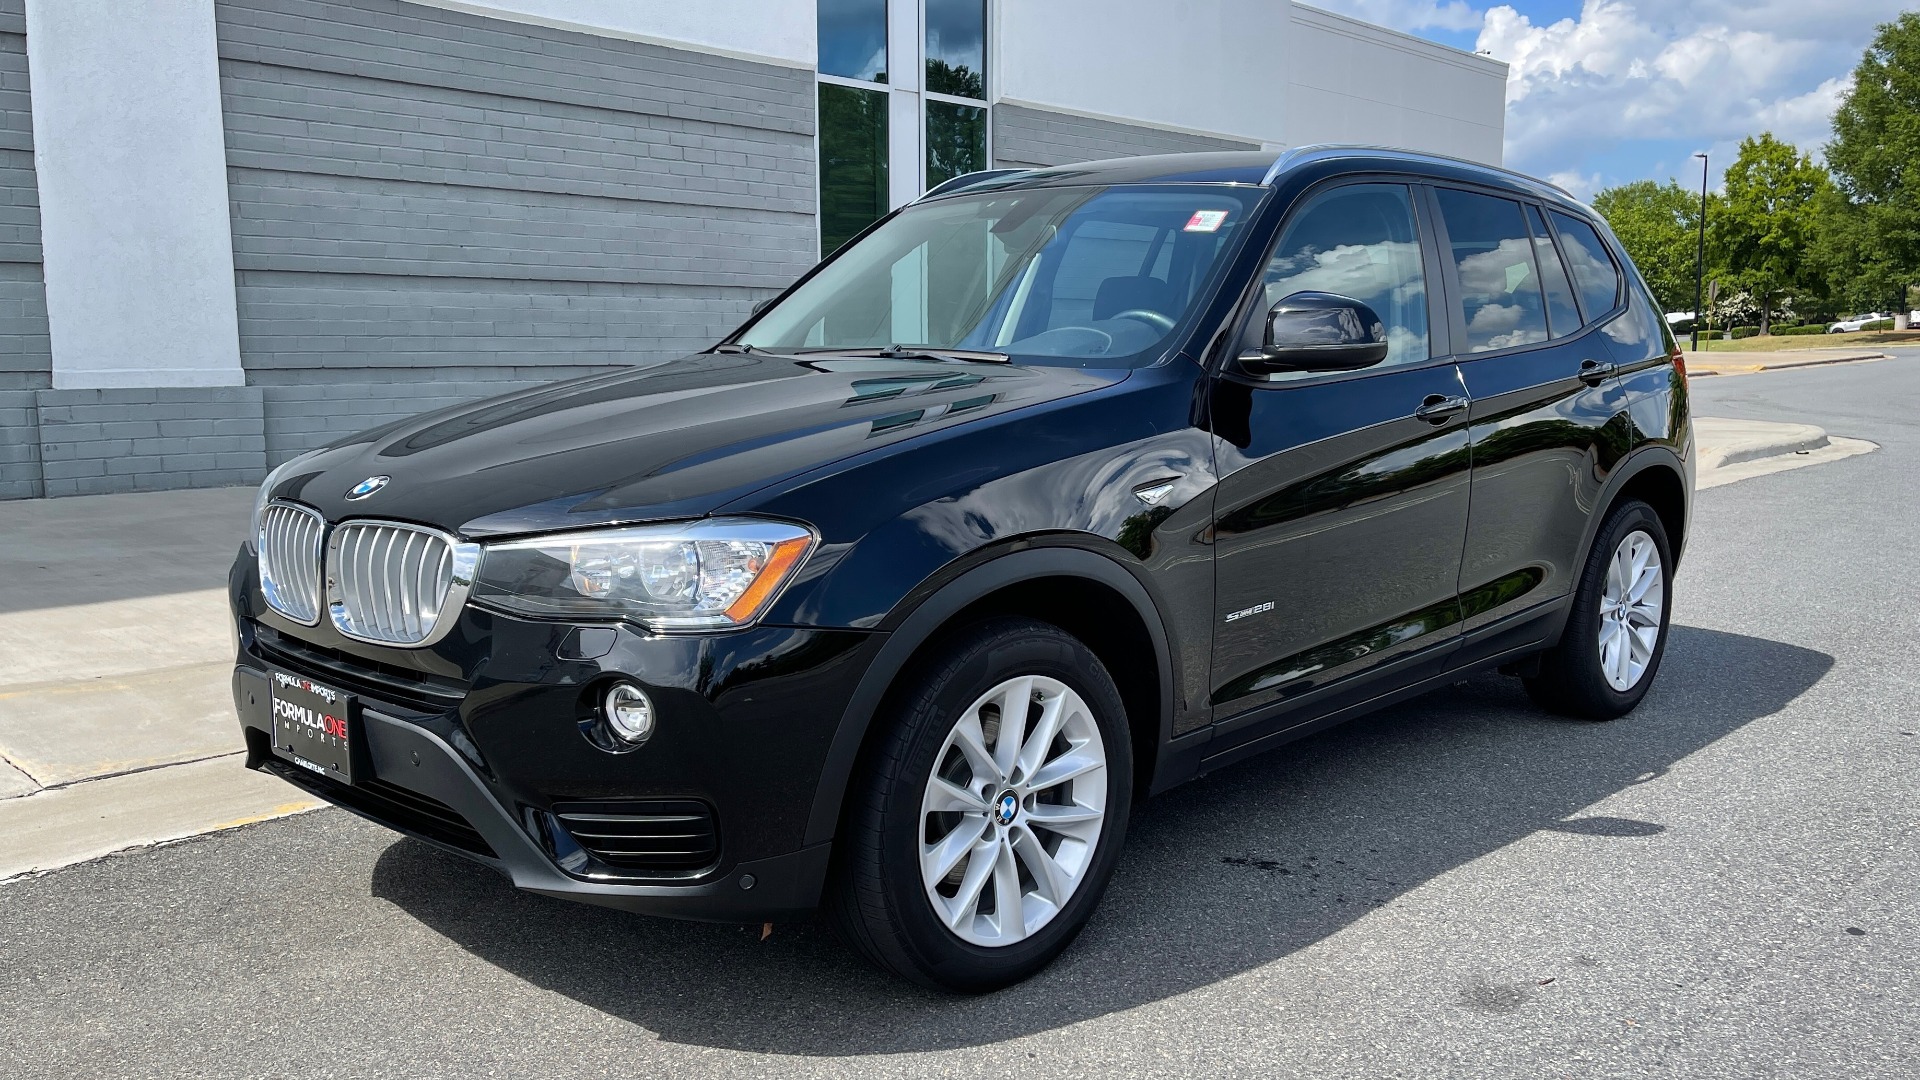 Used 2017 BMW X3 SDRIVE28I / DRVR ASST PKG / HTD STS / REARVIEW / 18IN WHEELS for sale Sold at Formula Imports in Charlotte NC 28227 3